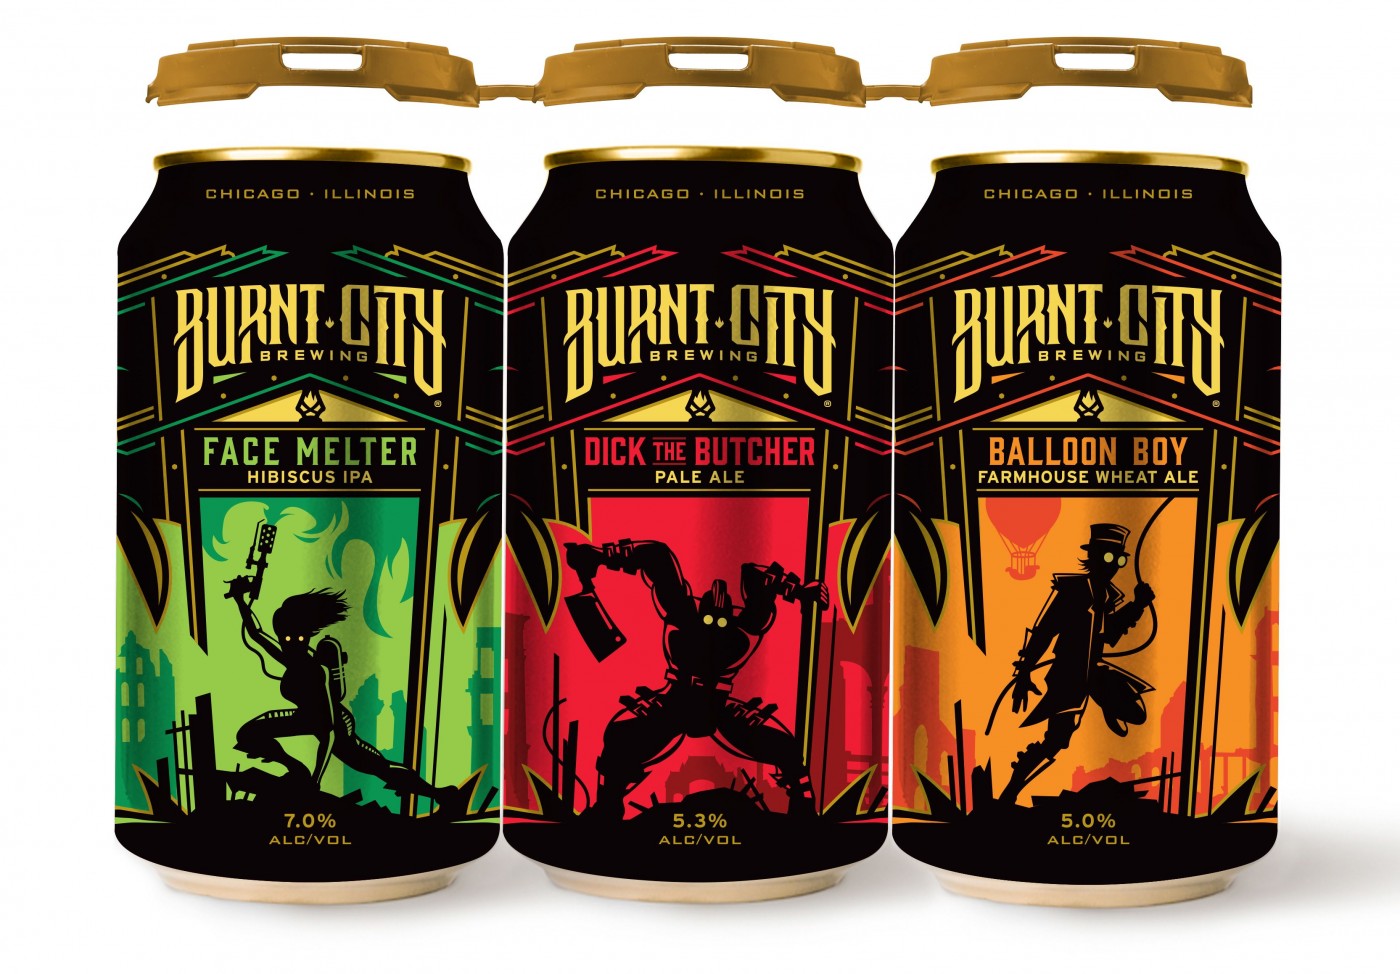 Chicago’s Atlas Brewing is now Burnt City Brewing